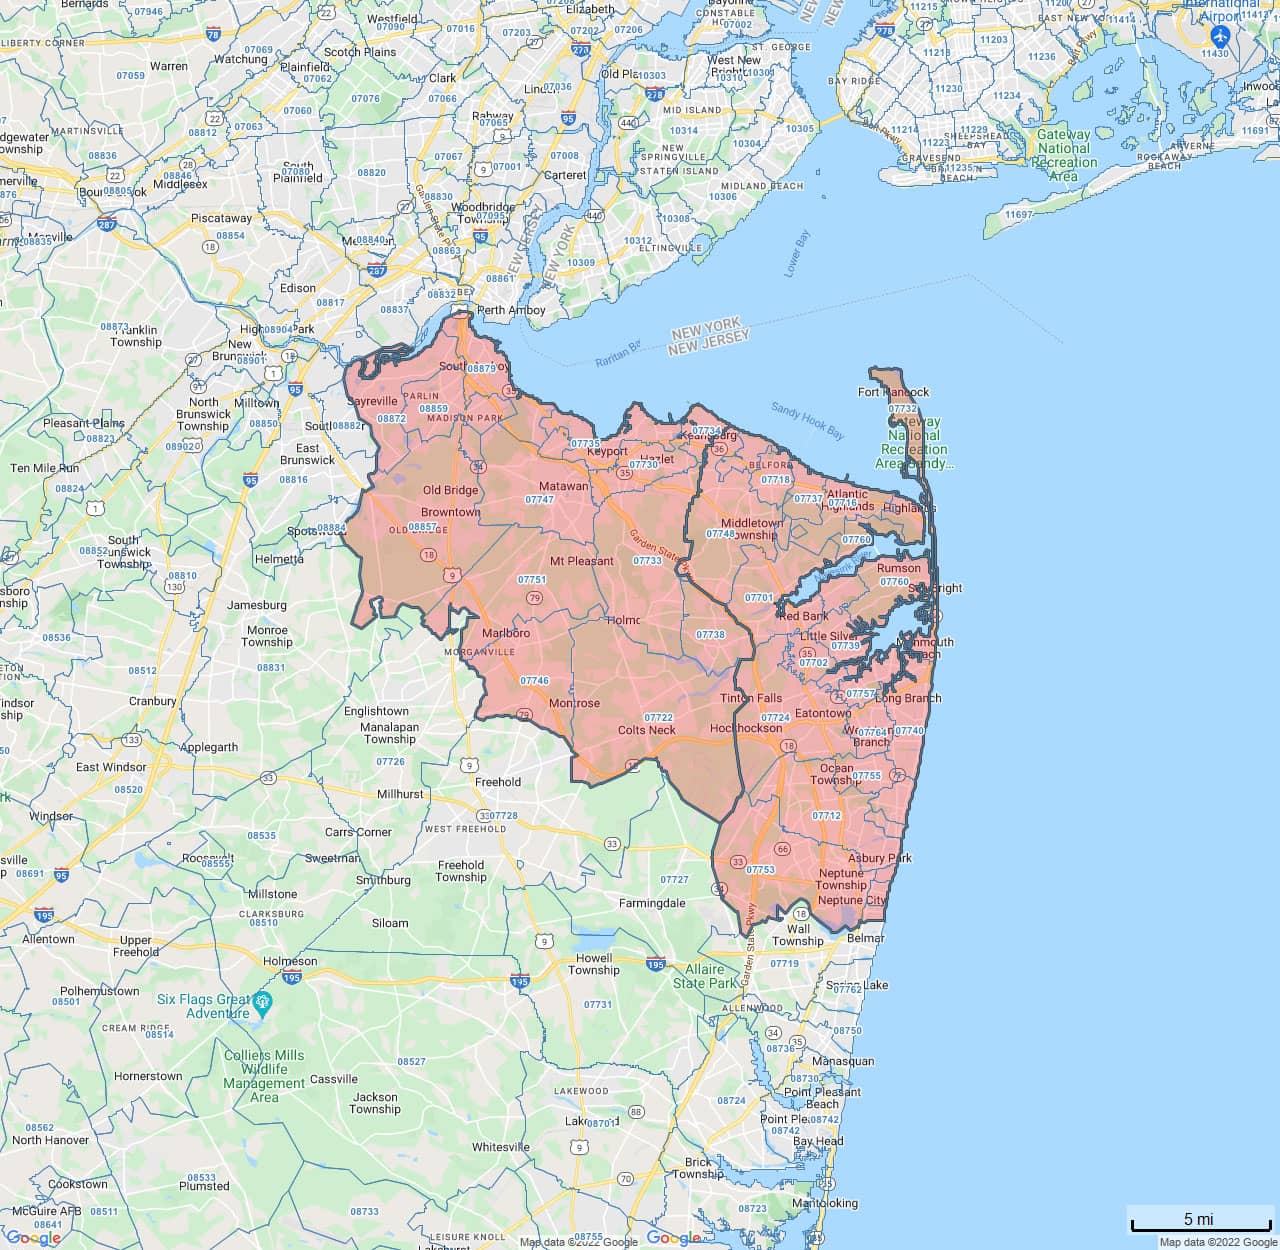 All Dry Services Area Coverage Map for Marlboro, NJ